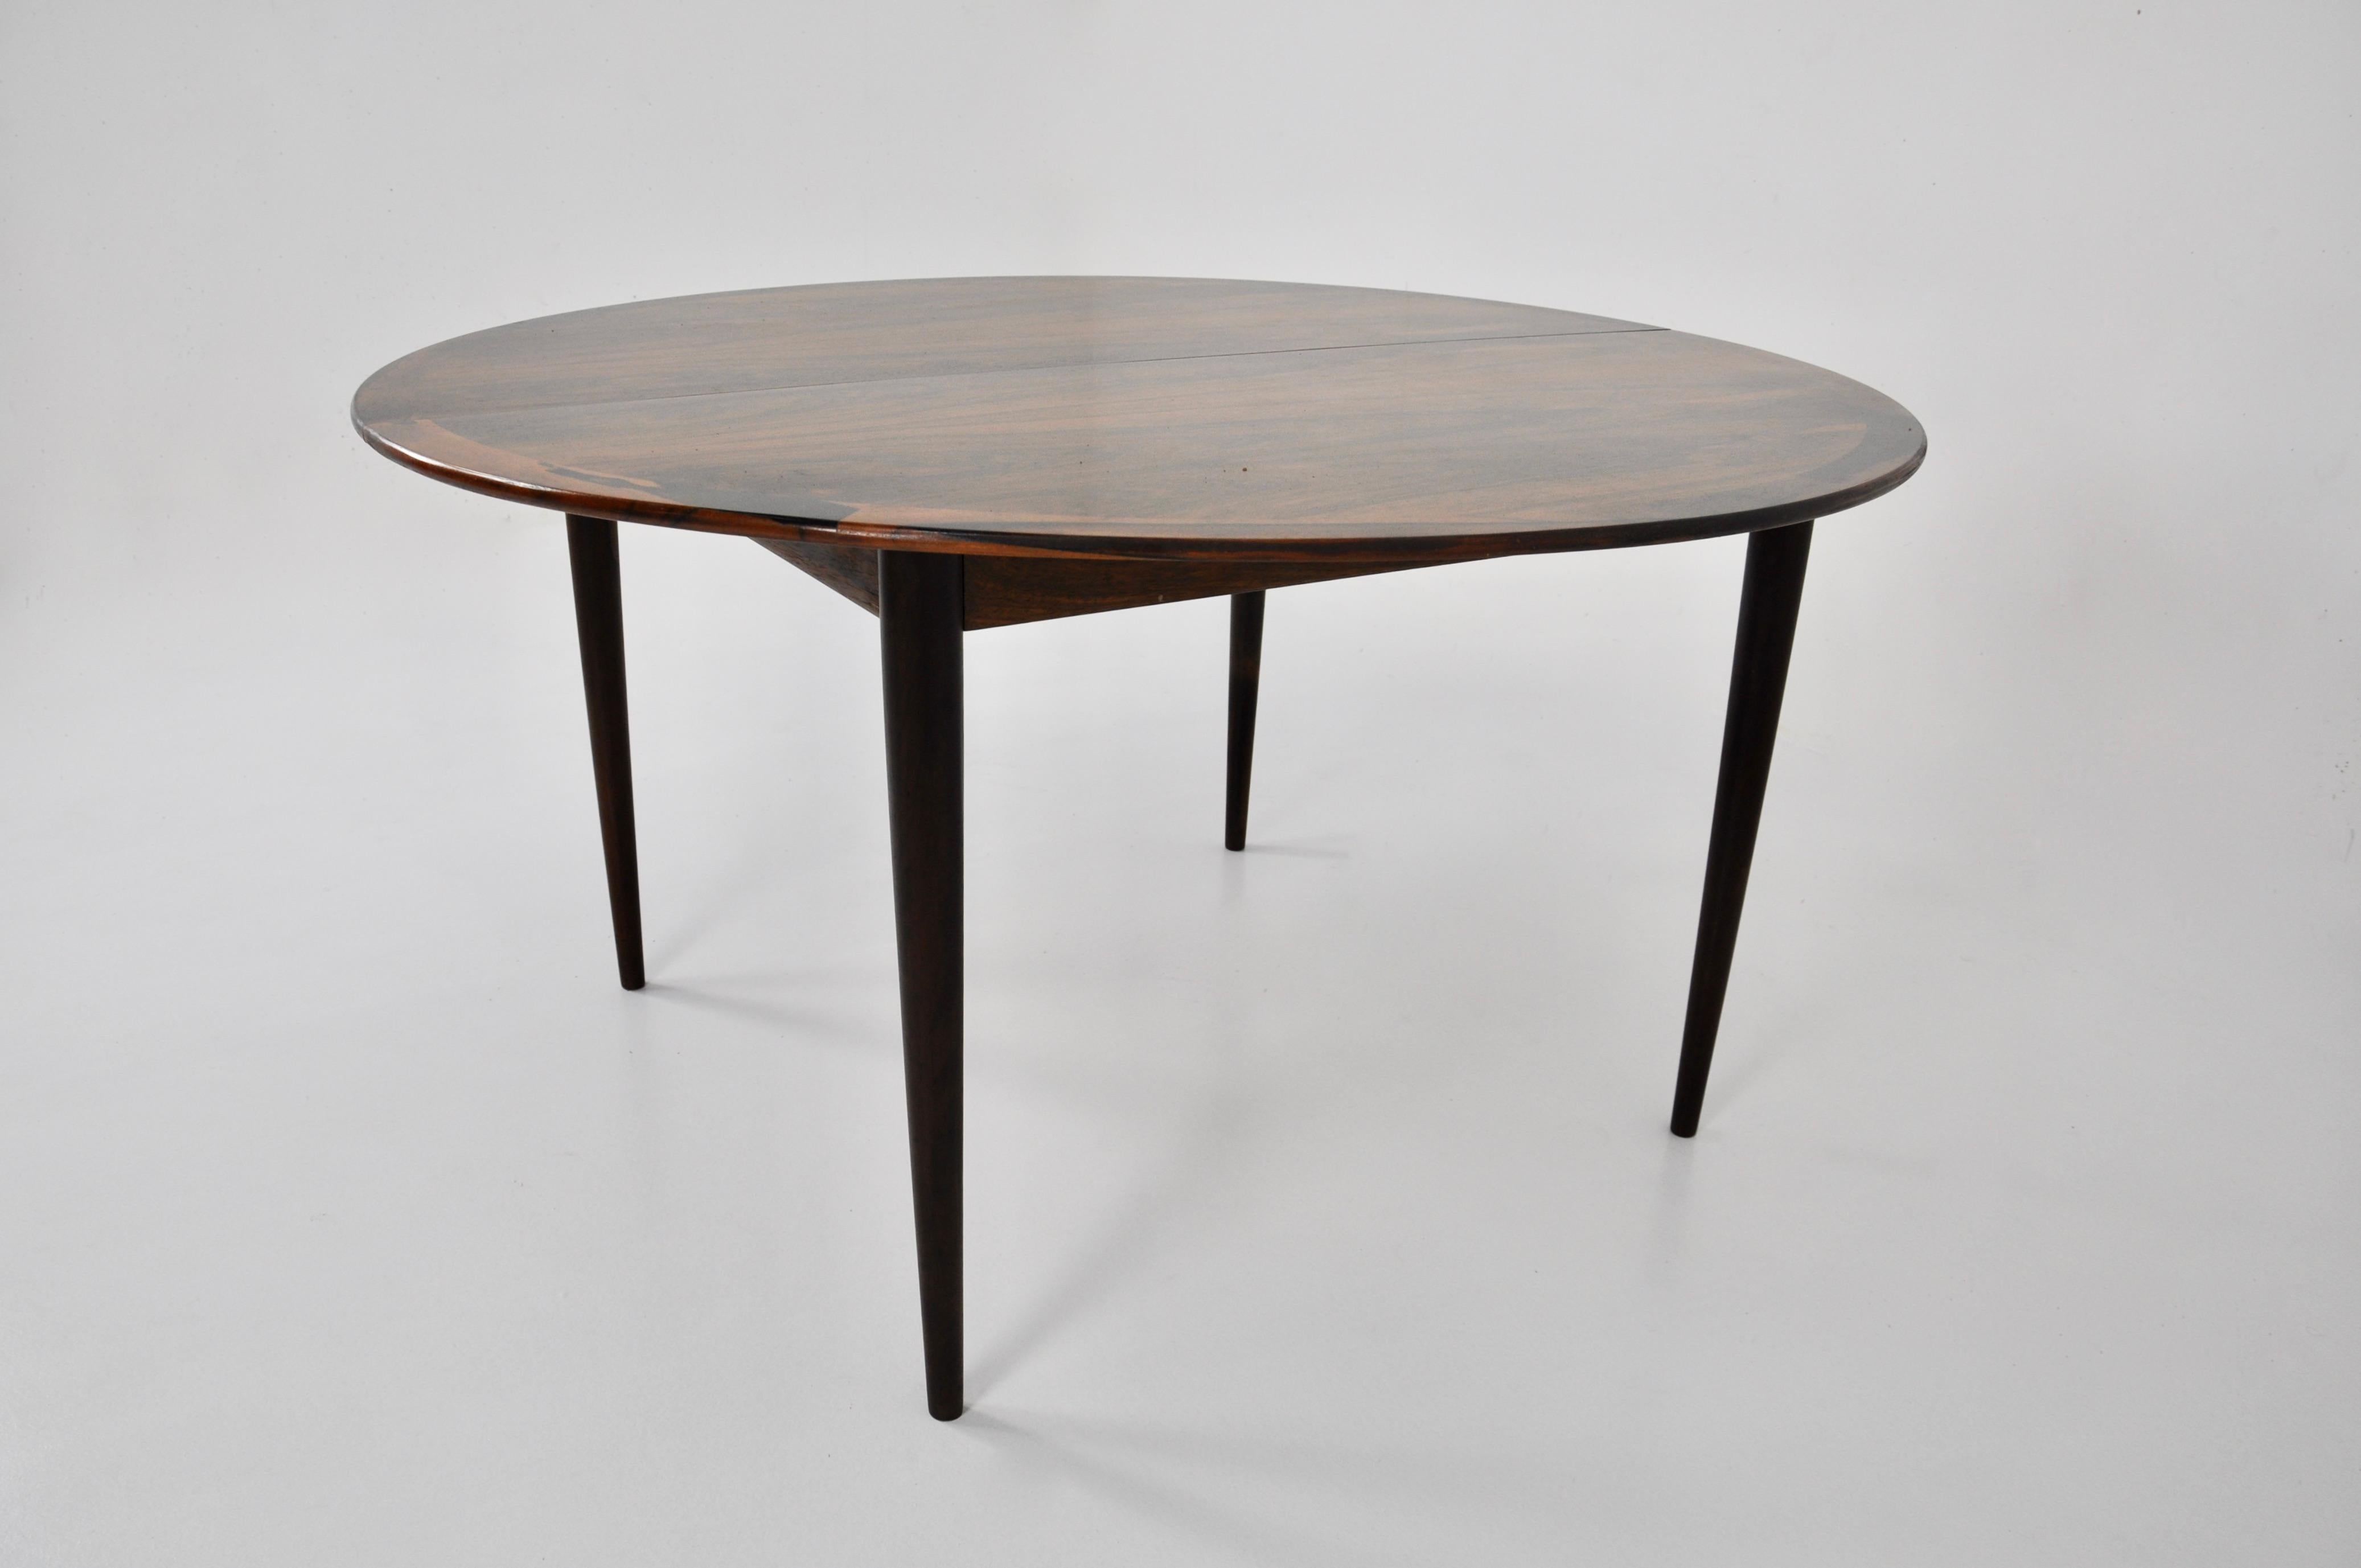 Extendable wooden table. Max width: 245 cm. Stamped Grete Jalk and Cj Rosengaarden. Wear due to time and age of the table.
  